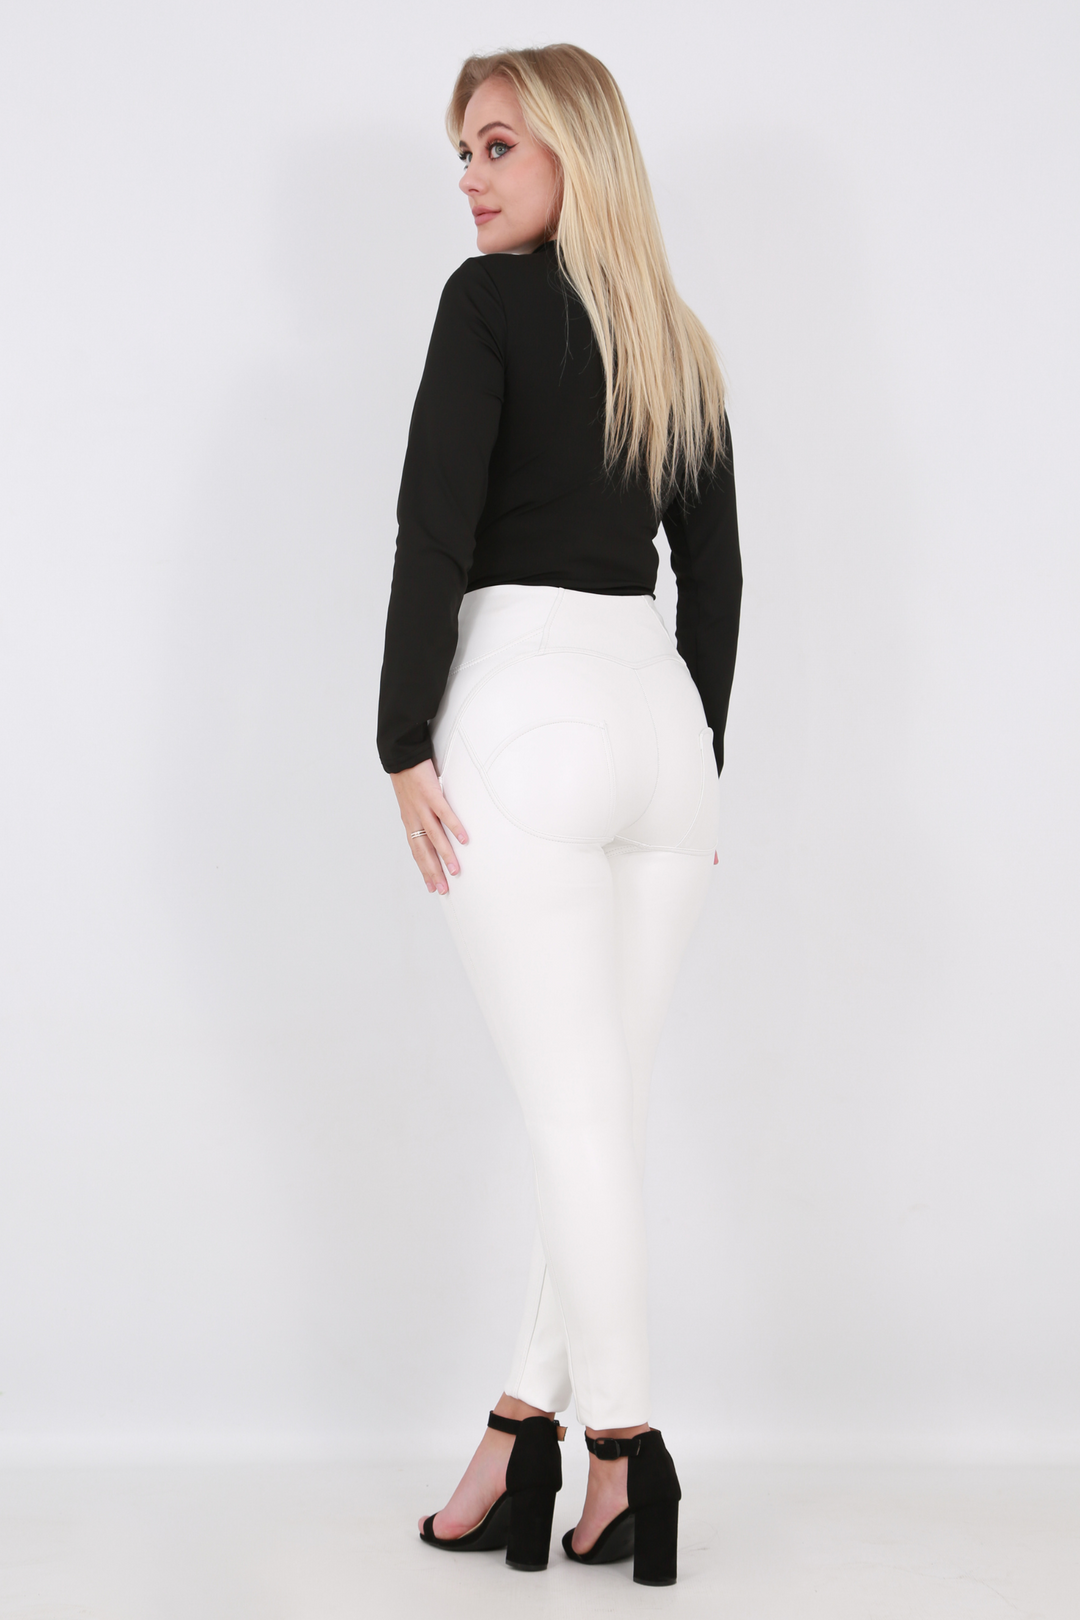 High Waist Butt Shaping leather stretch pants - Shiny Faux leather Whiteaos-init aos-animate